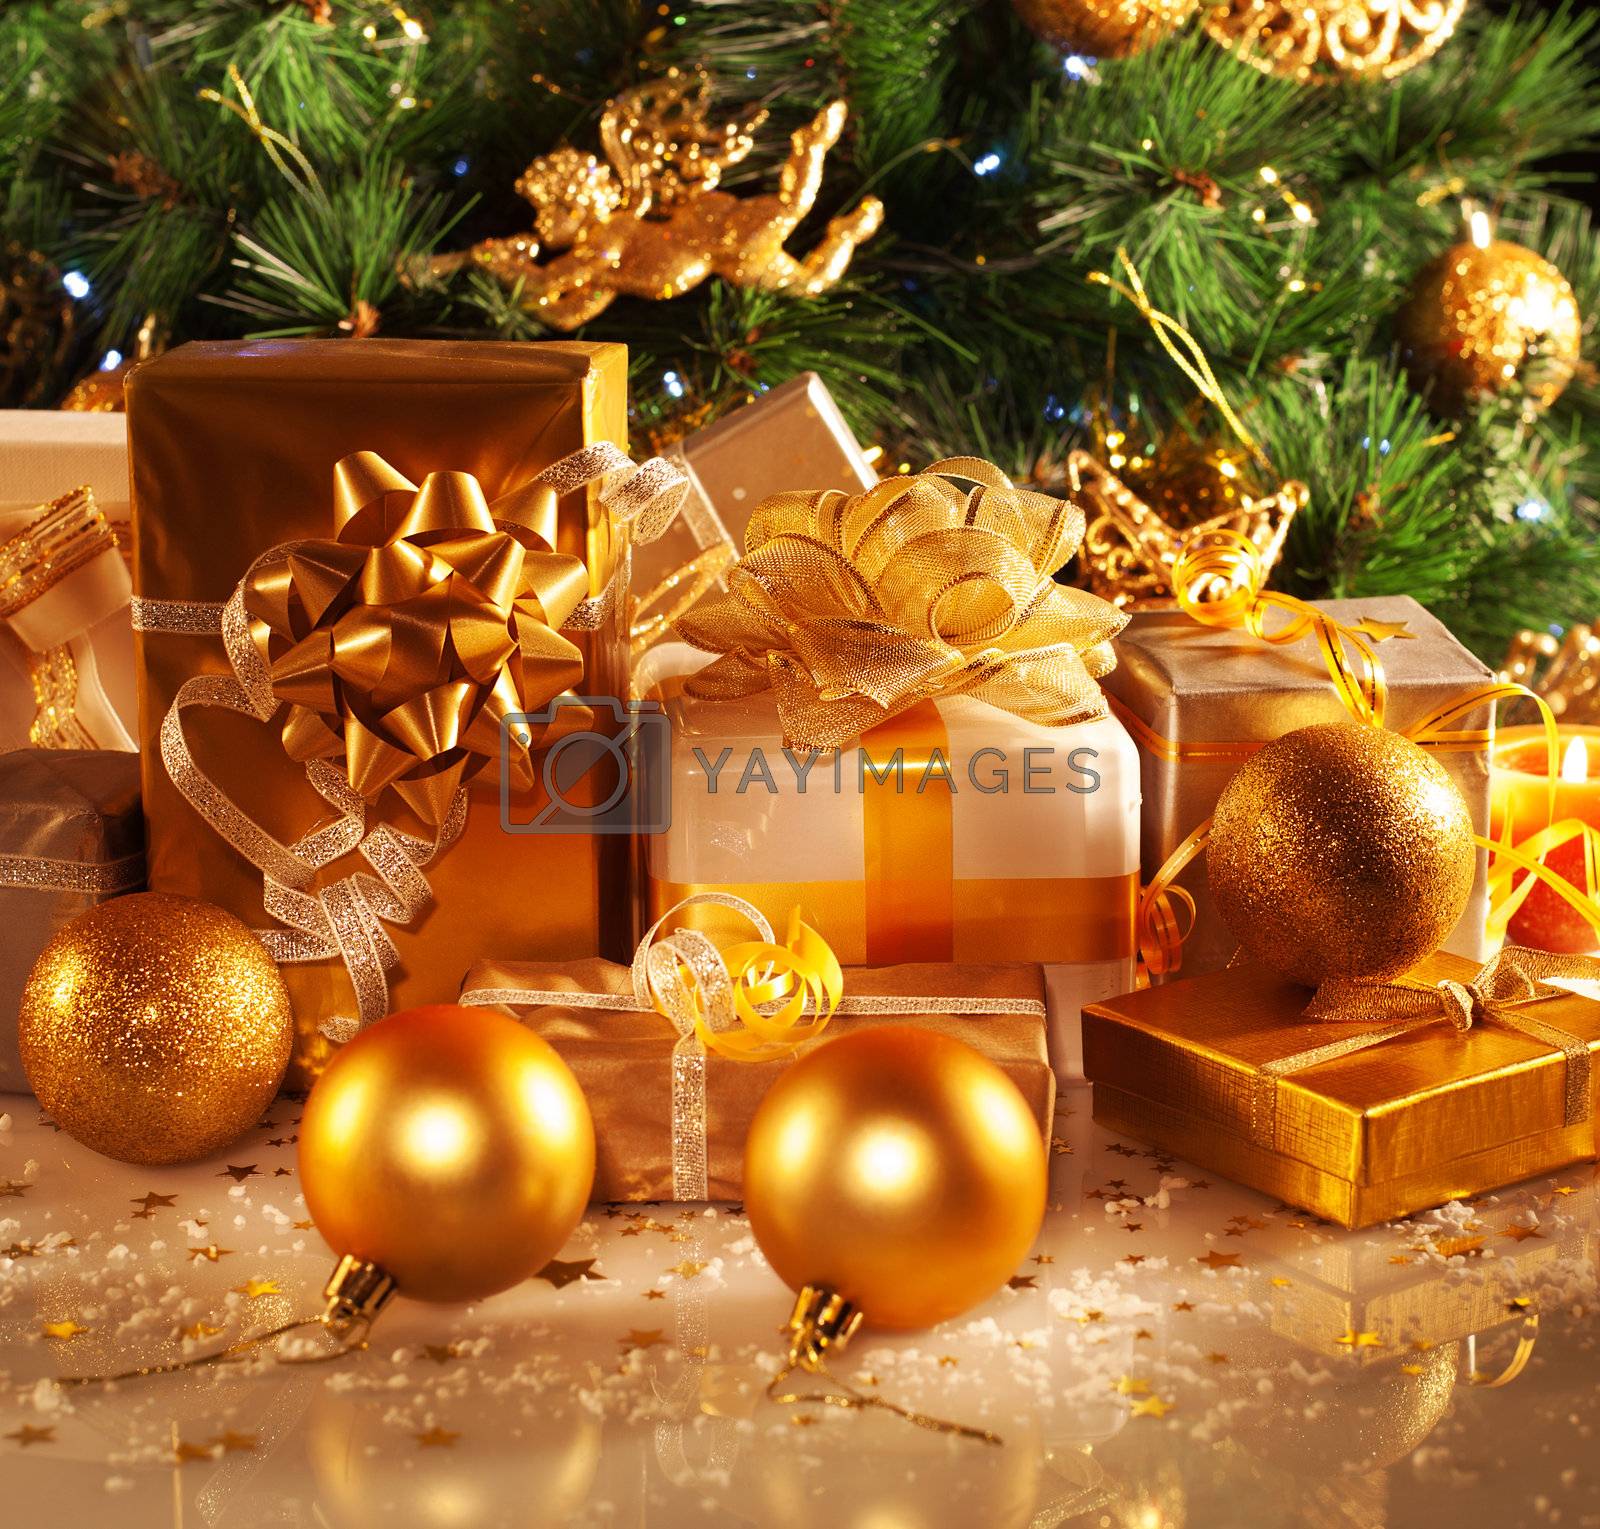 Royalty free image of New Year gifts by Anna_Omelchenko